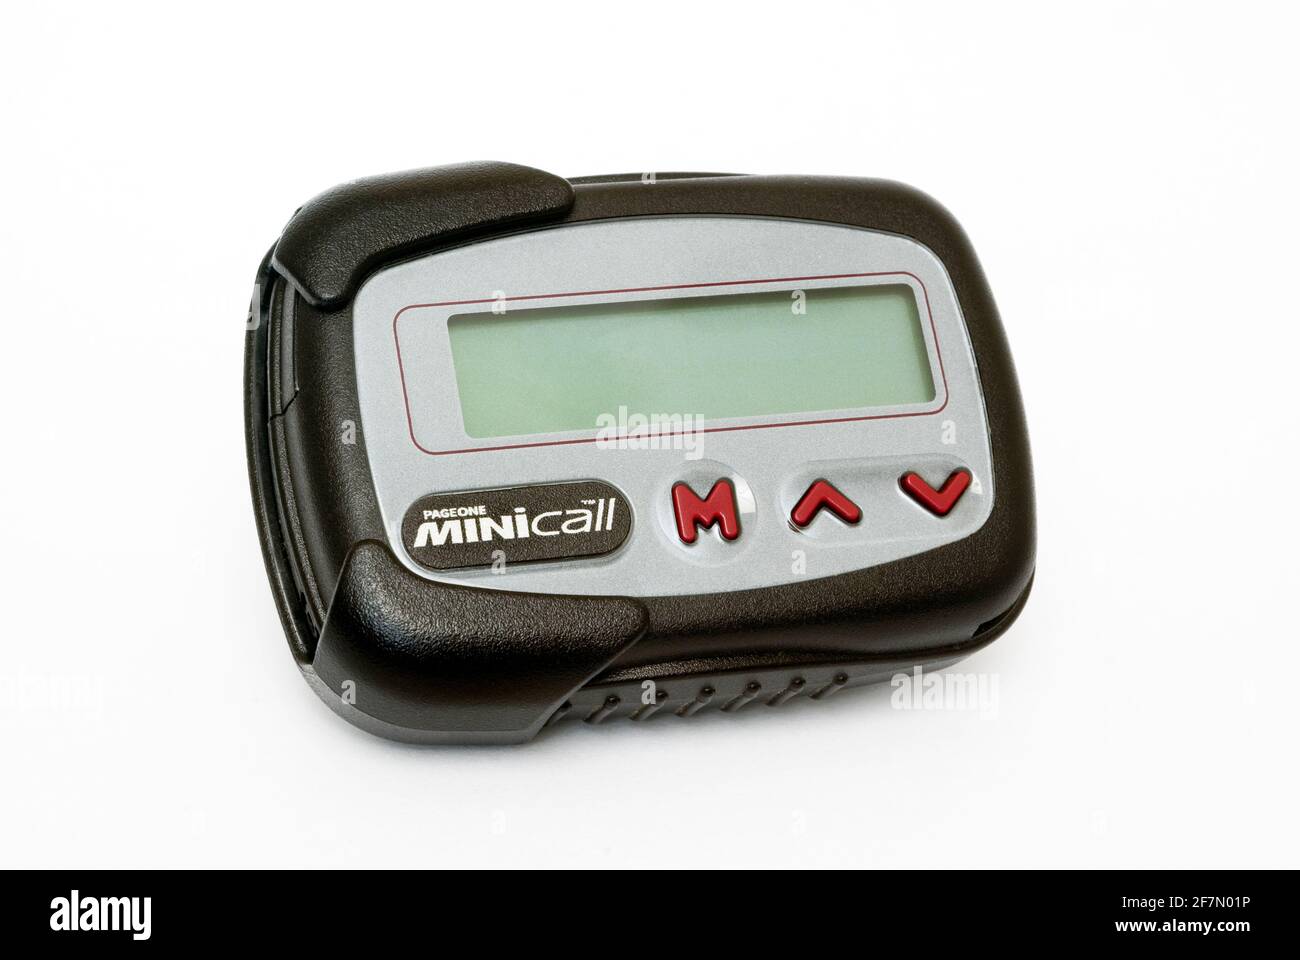 Antiguo Minicall Pager Foto de stock